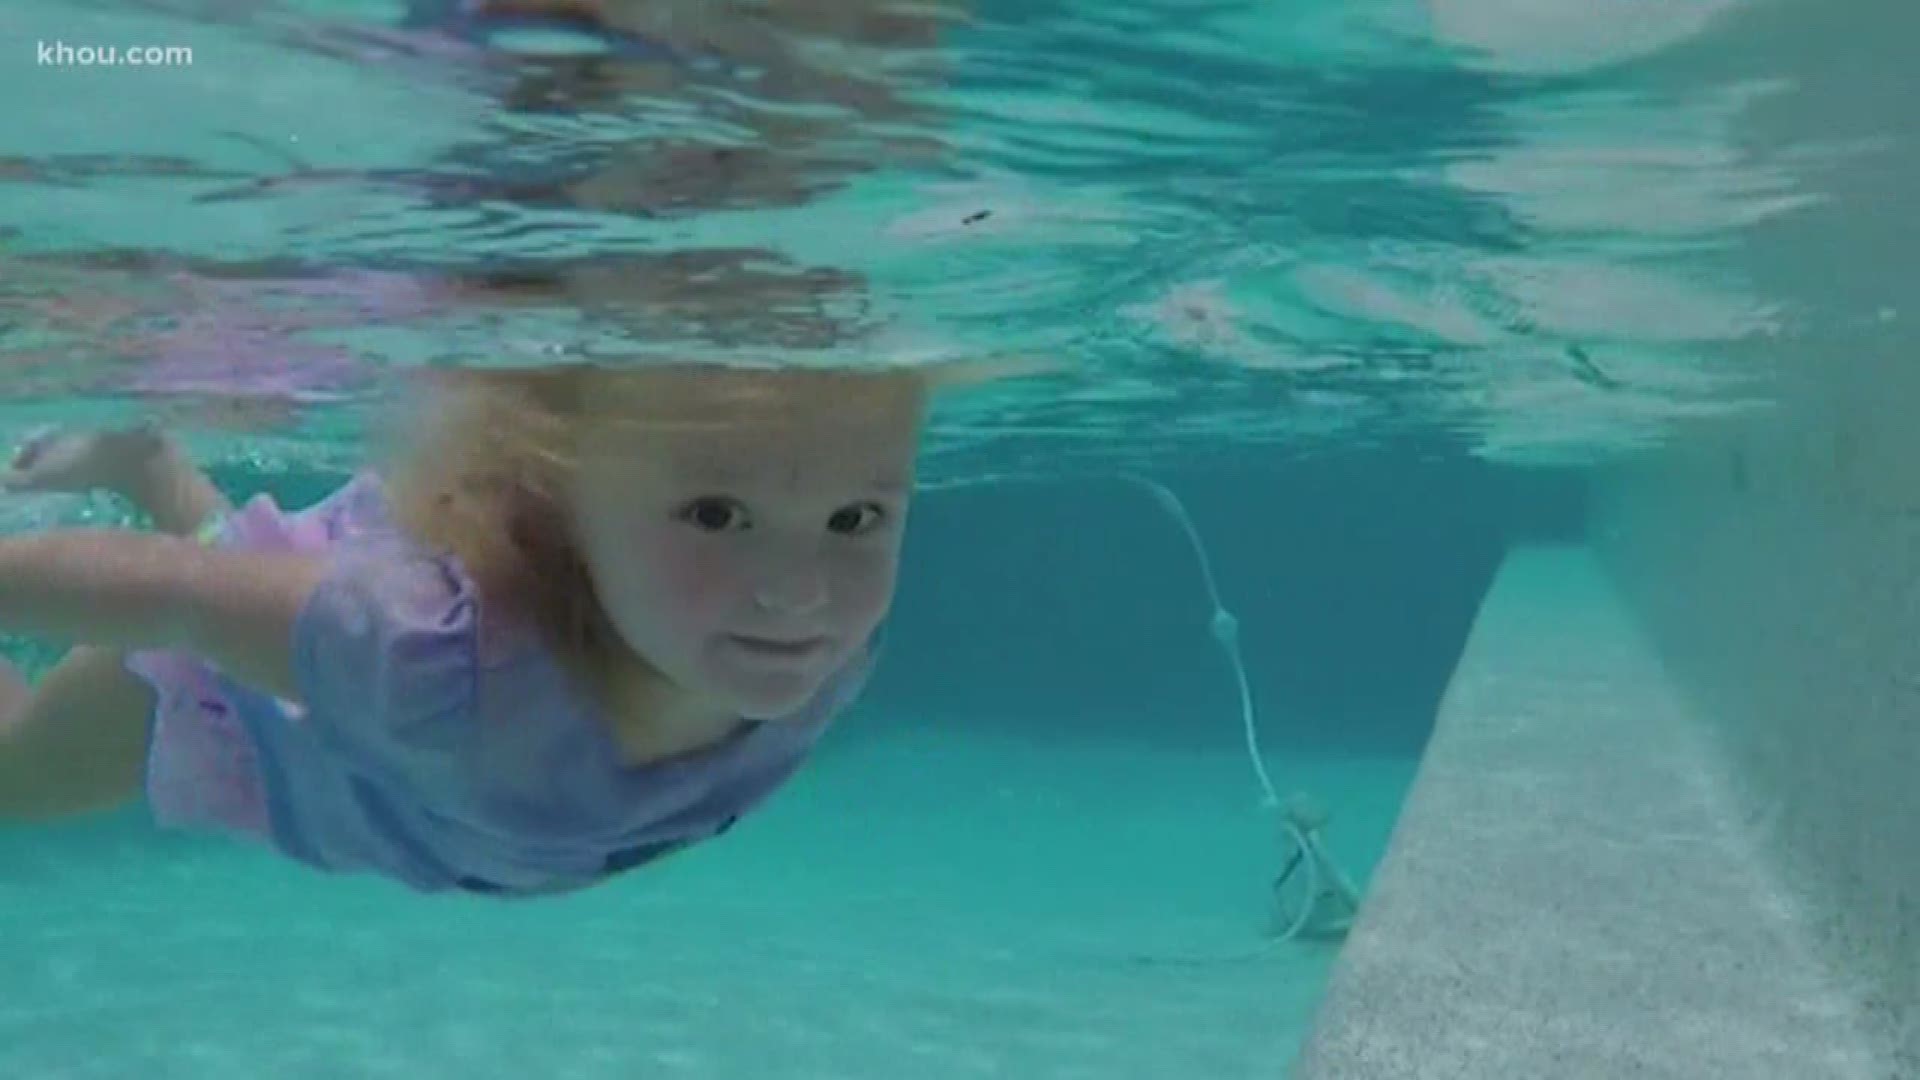 Drowning is the second leading cause of death for kids under 15 years old. After five drownings or near drownings in the Houston-area in three days, we wanted to share tips on how to protect your kids in the water.